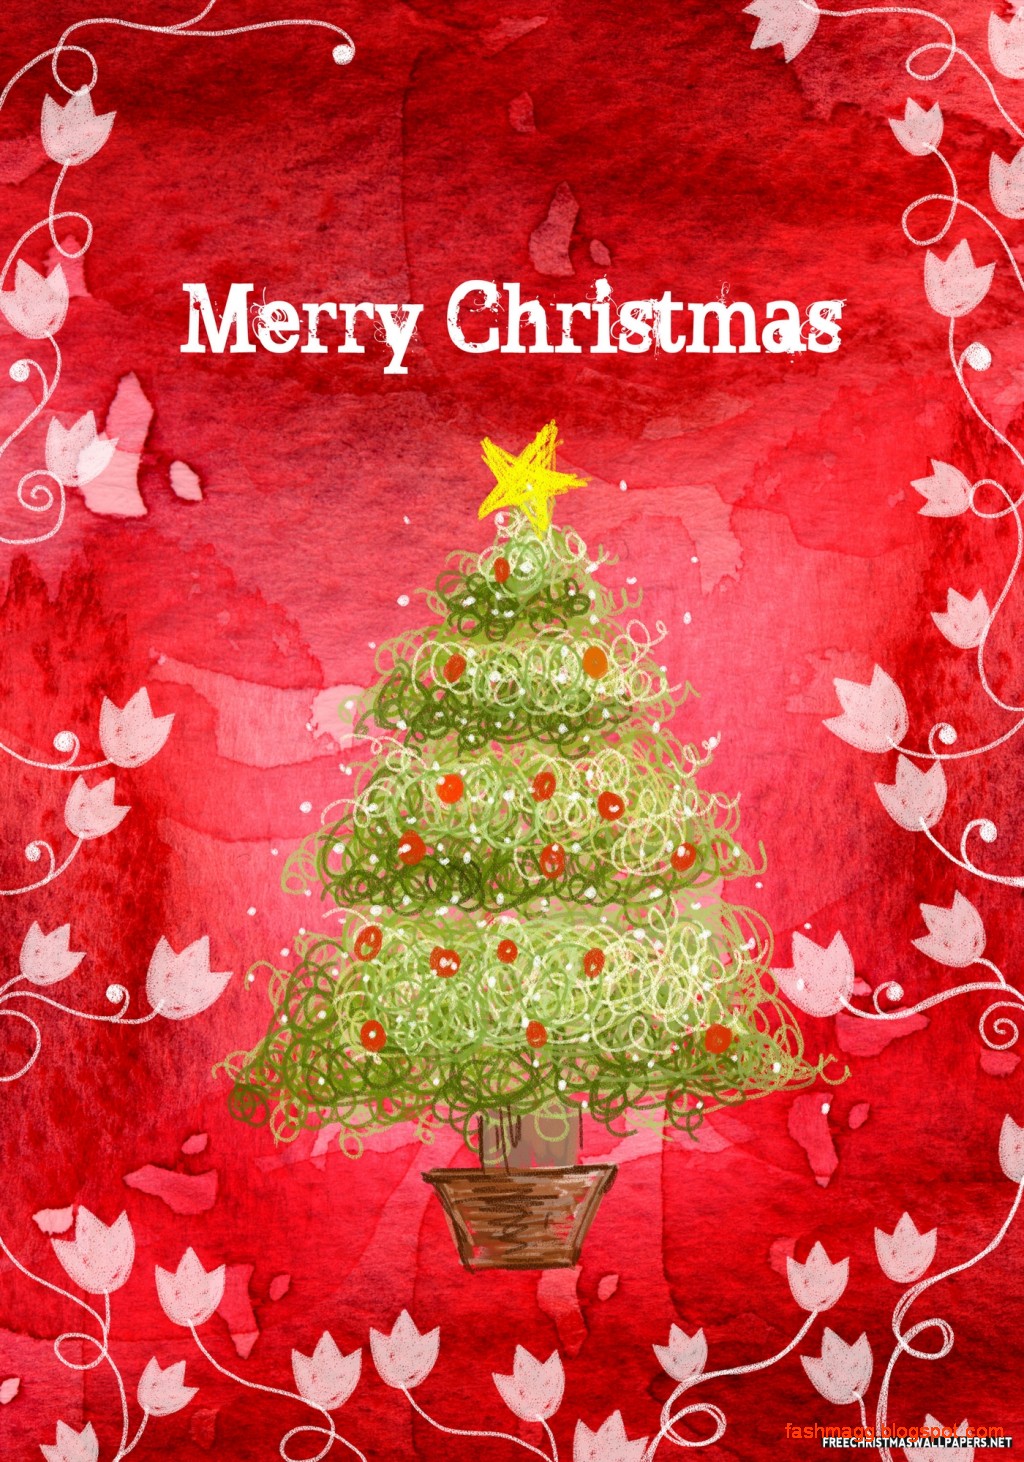 Merry Christmas X-Mass Greeting Cards Pictures-Christmas Cards Ideas-Gifts-Images-Photos11